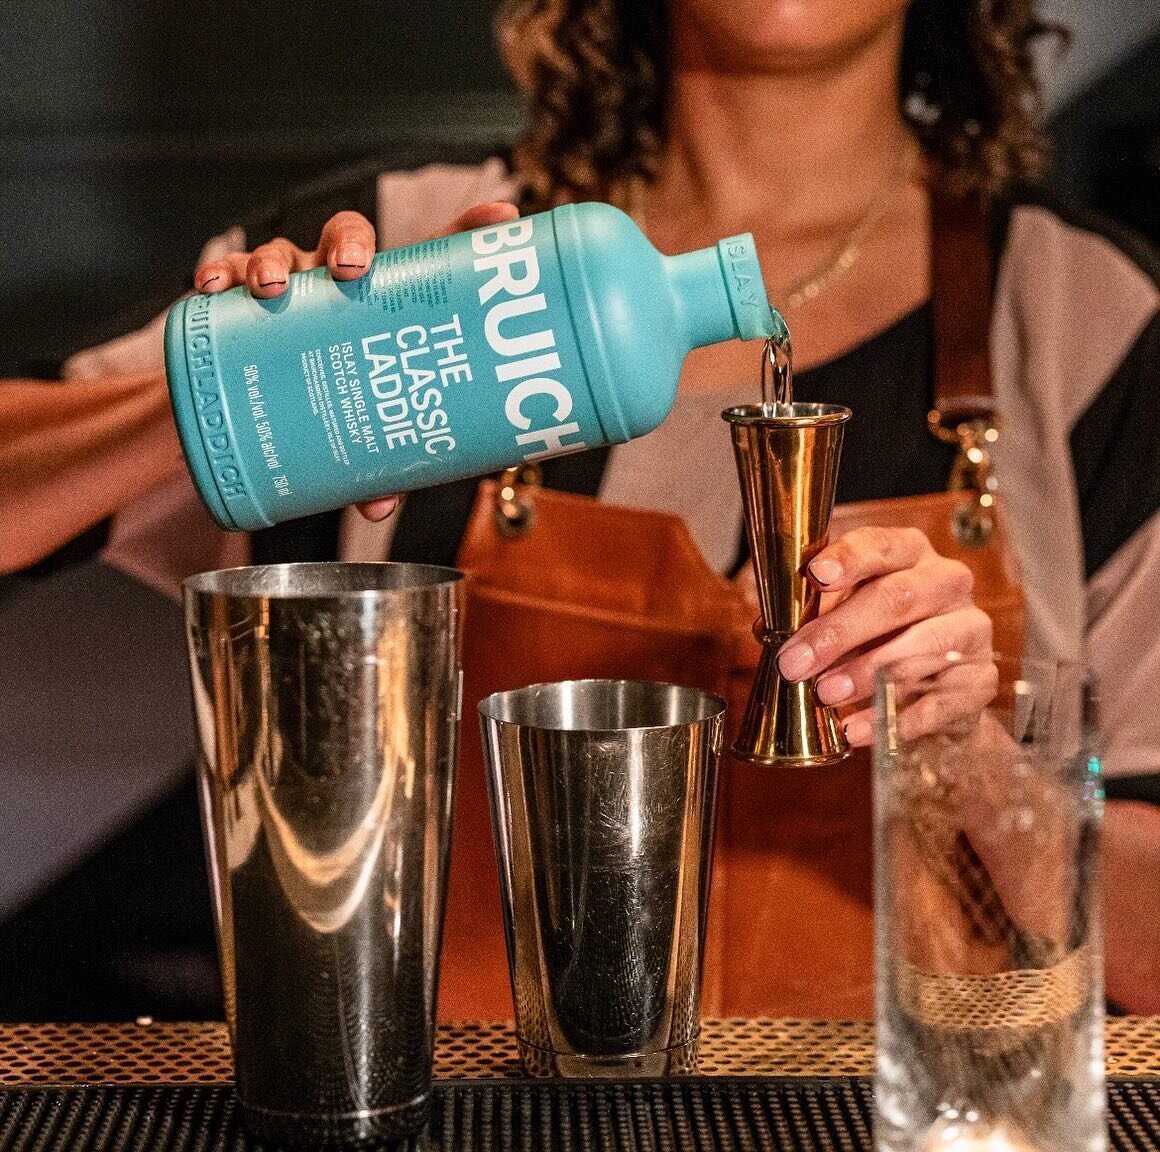 Thanks for the memories @sxsw 👋&nbsp;At this year&rsquo;s festival, KWT Global helped to operate the @bruichladdich Registrant Lounge&nbsp;booth, where over 5,000 guests sampled The Classic Laddie single malt Scotch whisky&nbsp;and other exclusive a